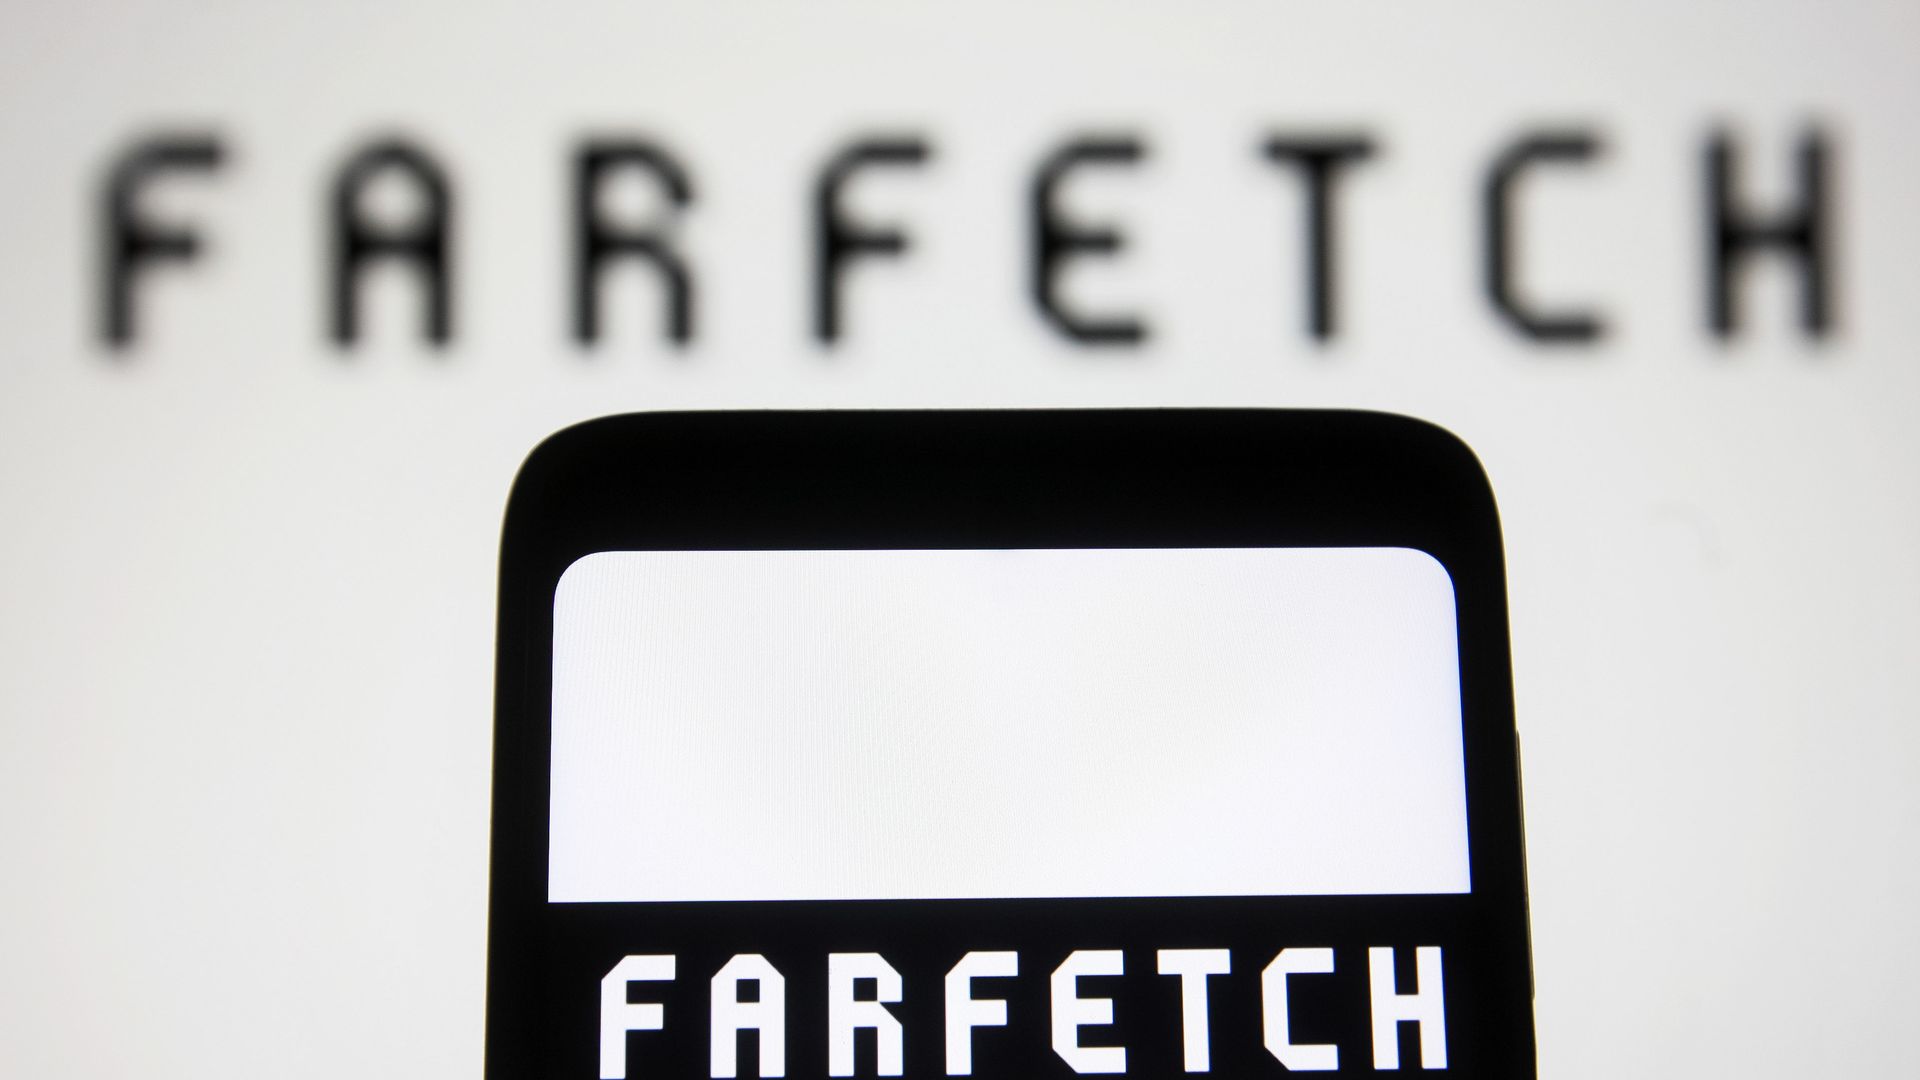 the Farfetch logo is displayed on a smartphone screen and in the background. (Photo Illustration by Pavlo Gonchar/SOPA Images/LightRocket via Getty Images)